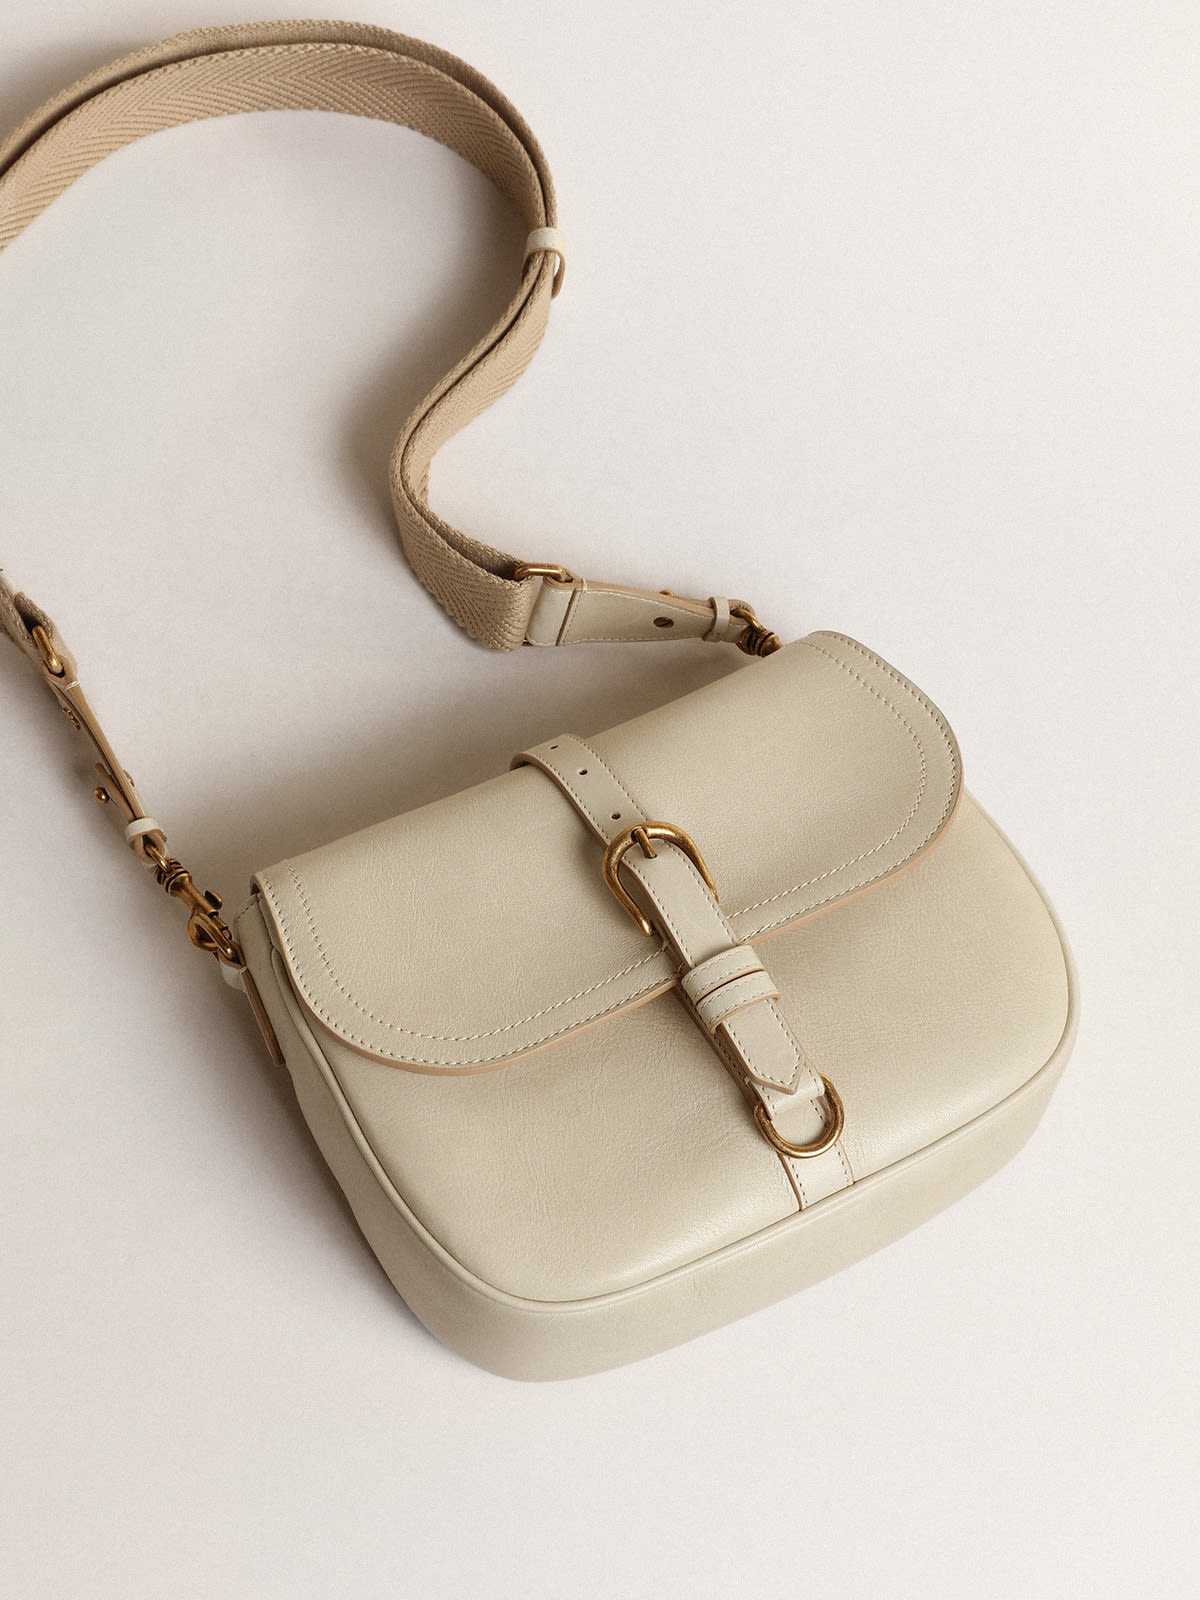 Medium Sally Bag in porcelain leather with buckle and contrasting shoulder strap - 2